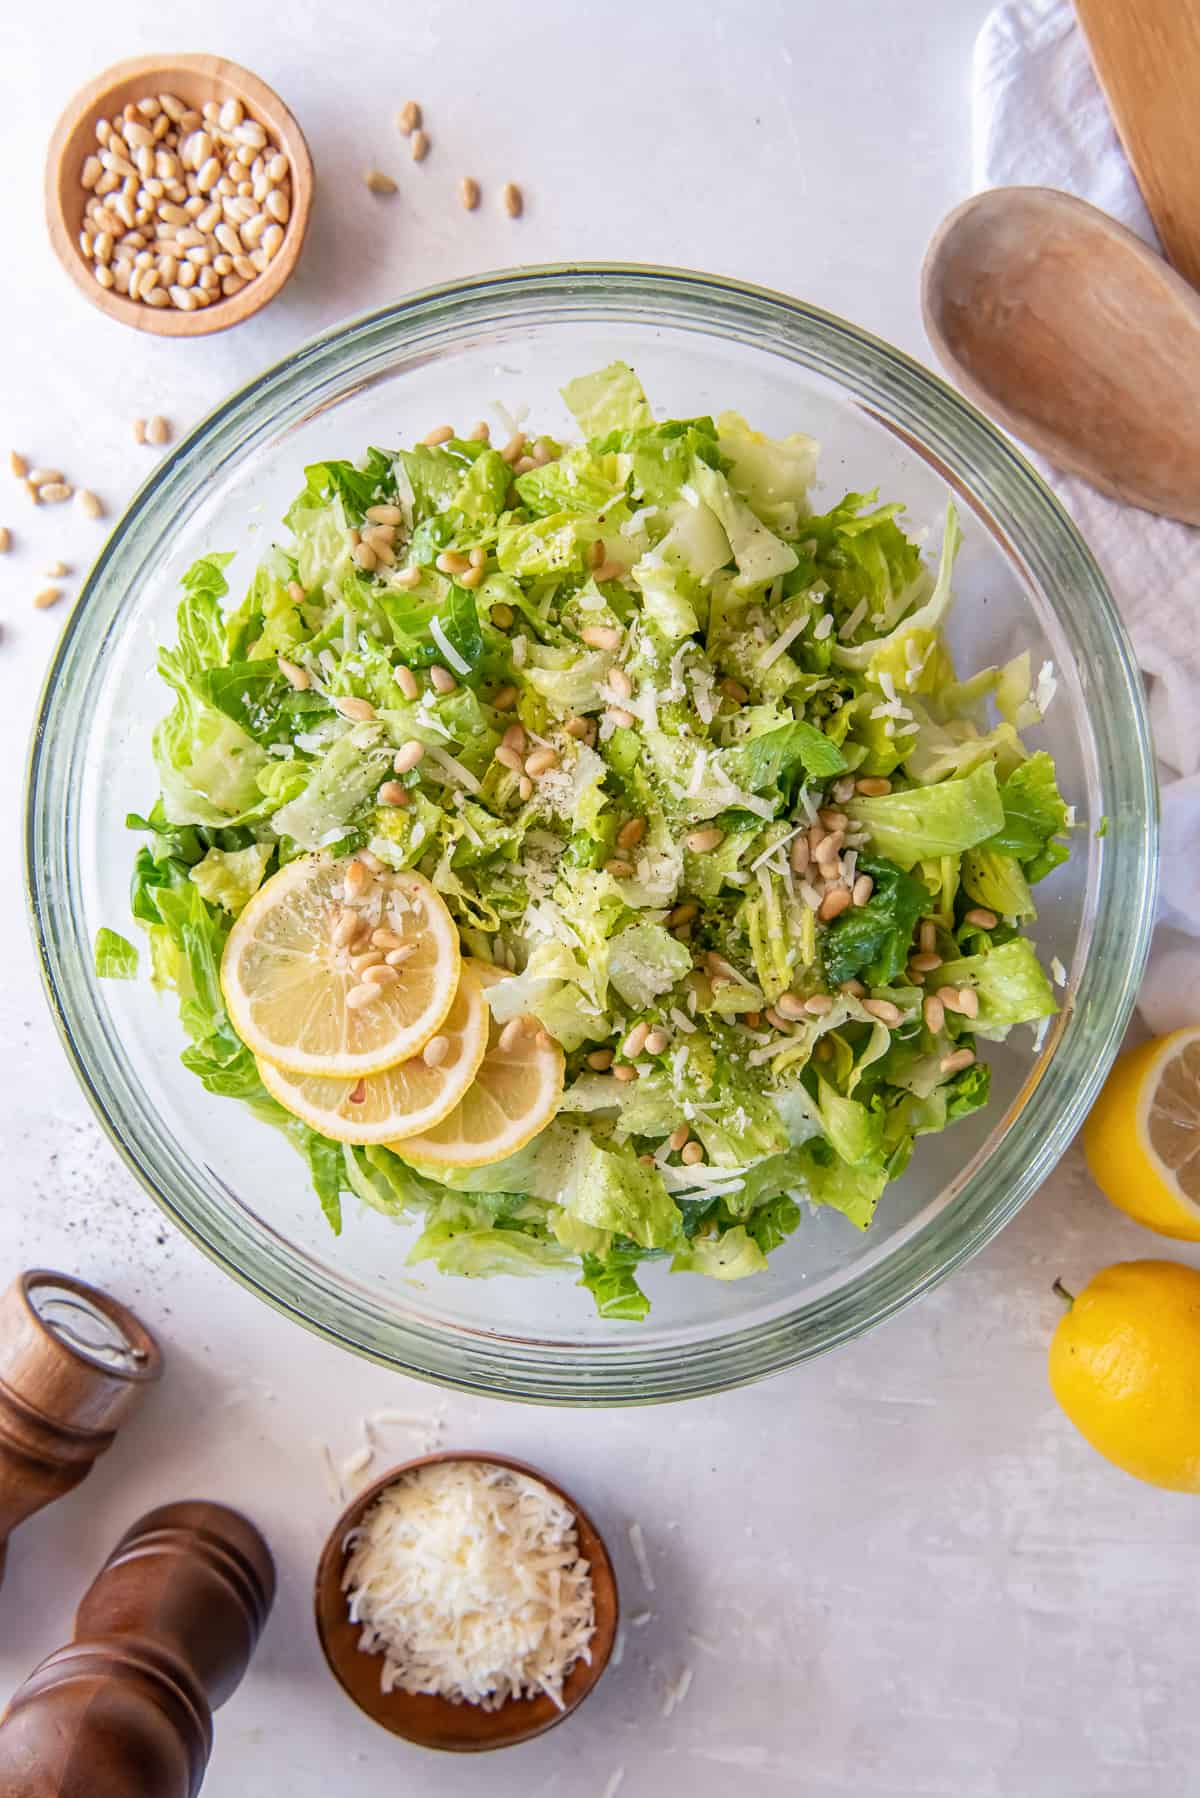 A top down shot of a salad of chopped romaine with Parmesan cheese and pine nuts garnished with lemon slices.